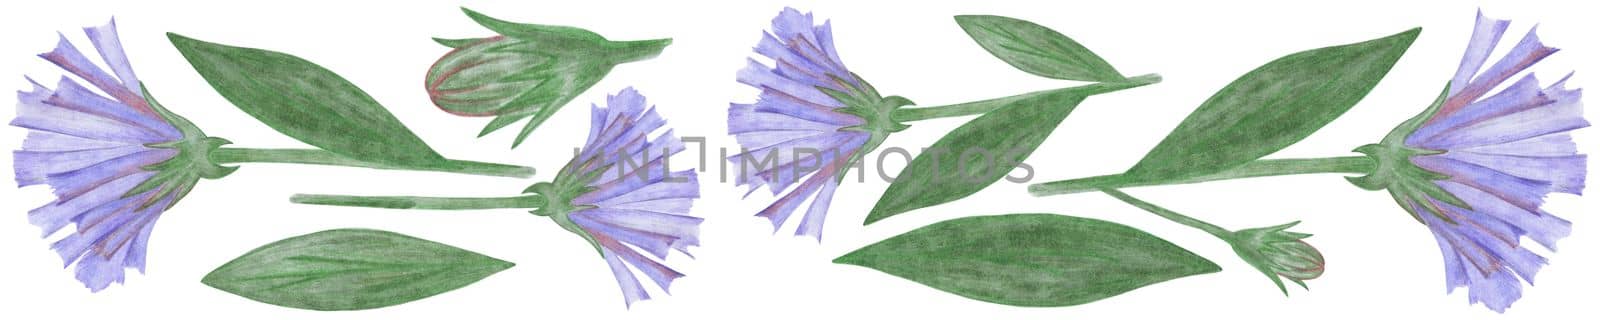 Set of Blue Flowers with Green Leaves Isolated on White Background. Blue Flower Element Drawn by Colored Pencil Collection.